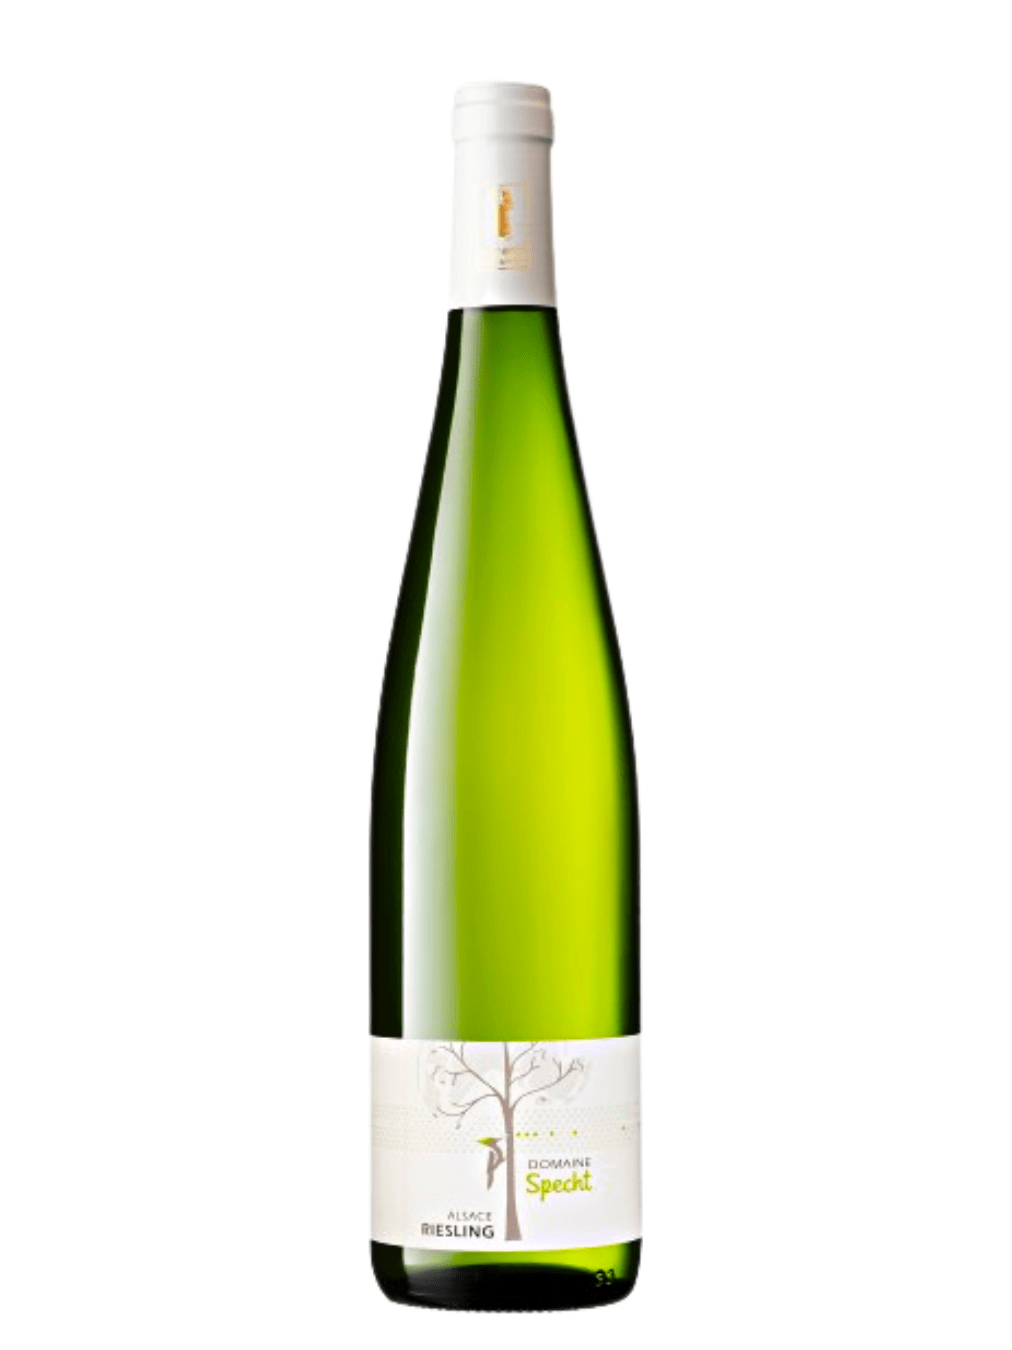 Shop Domaine Specht Domaine Specht Riesling 2020 online at PENTICTON artisanal French wine store in Hong Kong. Discover other French wines, promotions, workshops and featured offers at pentictonpacific.com 